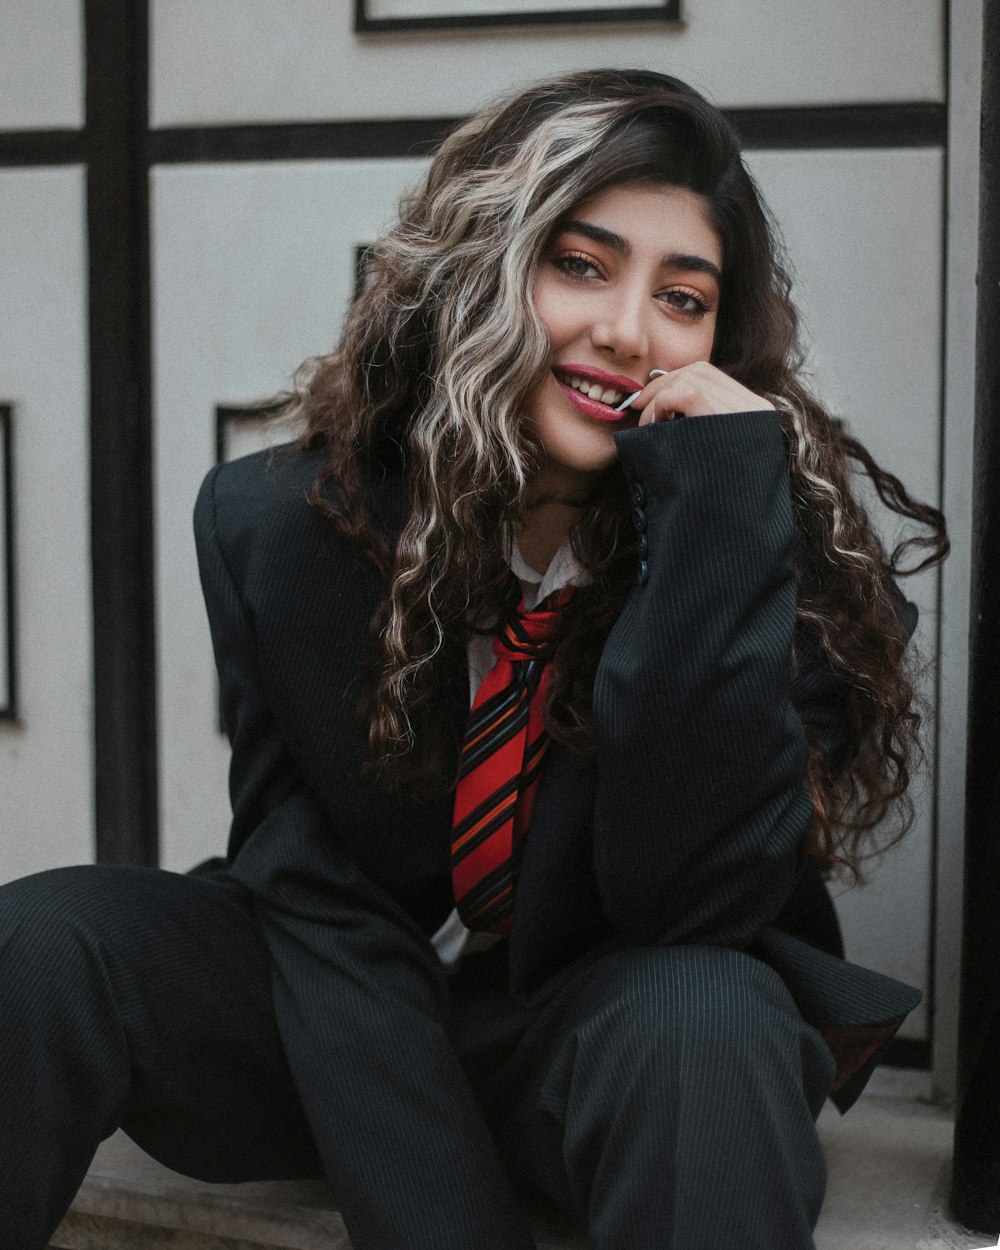 a woman in a suit and tie sitting on a step